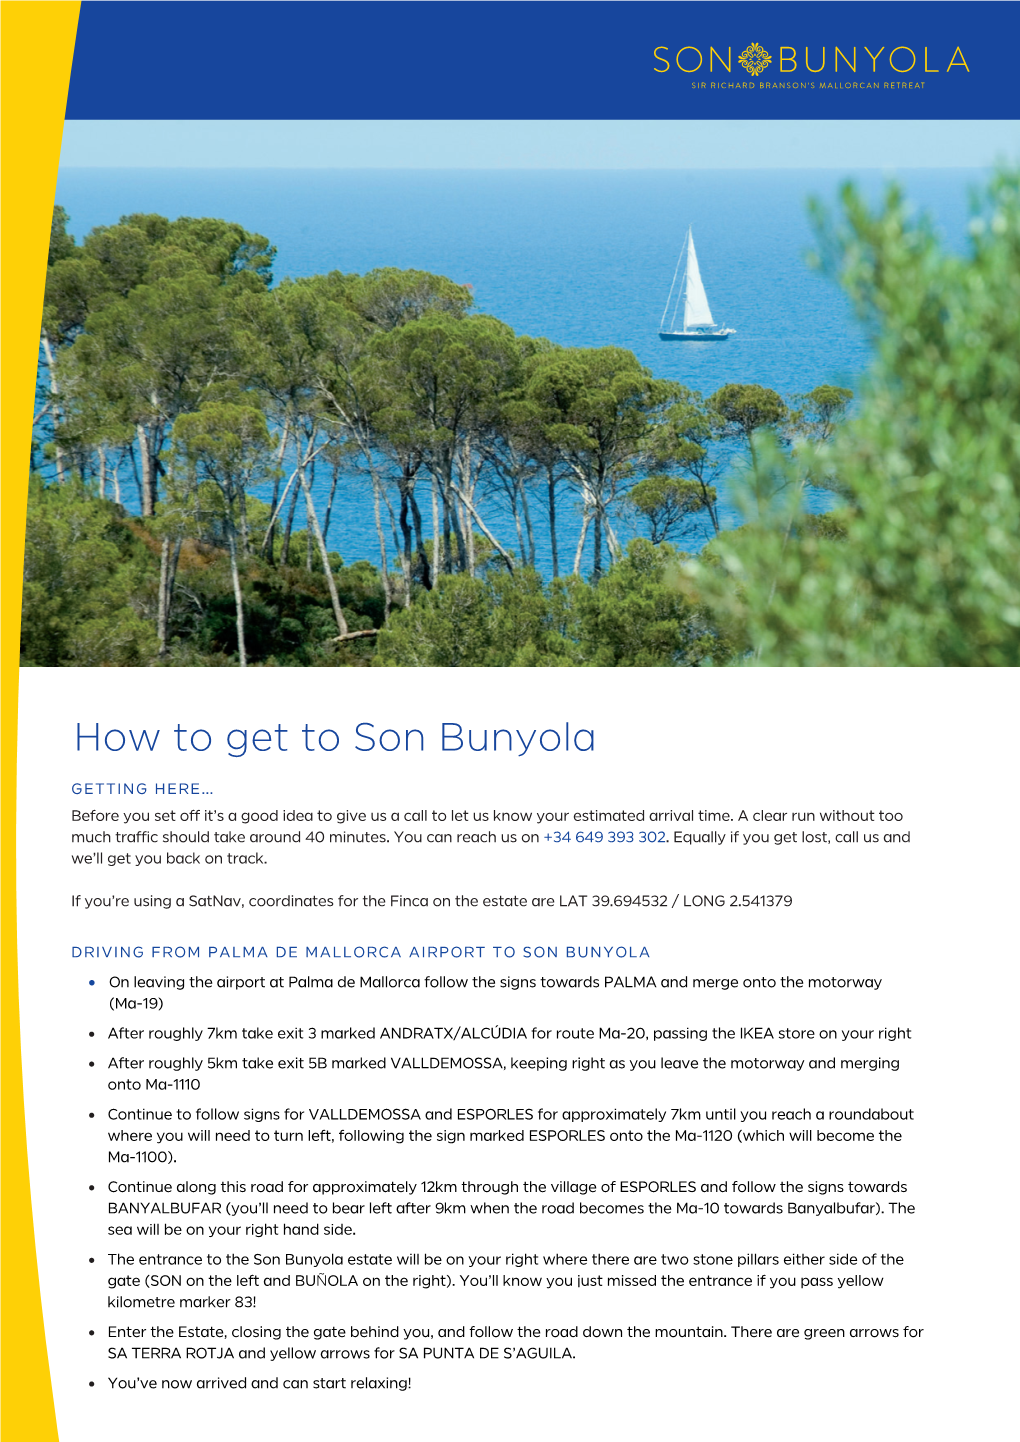 How to Get to Son Bunyola